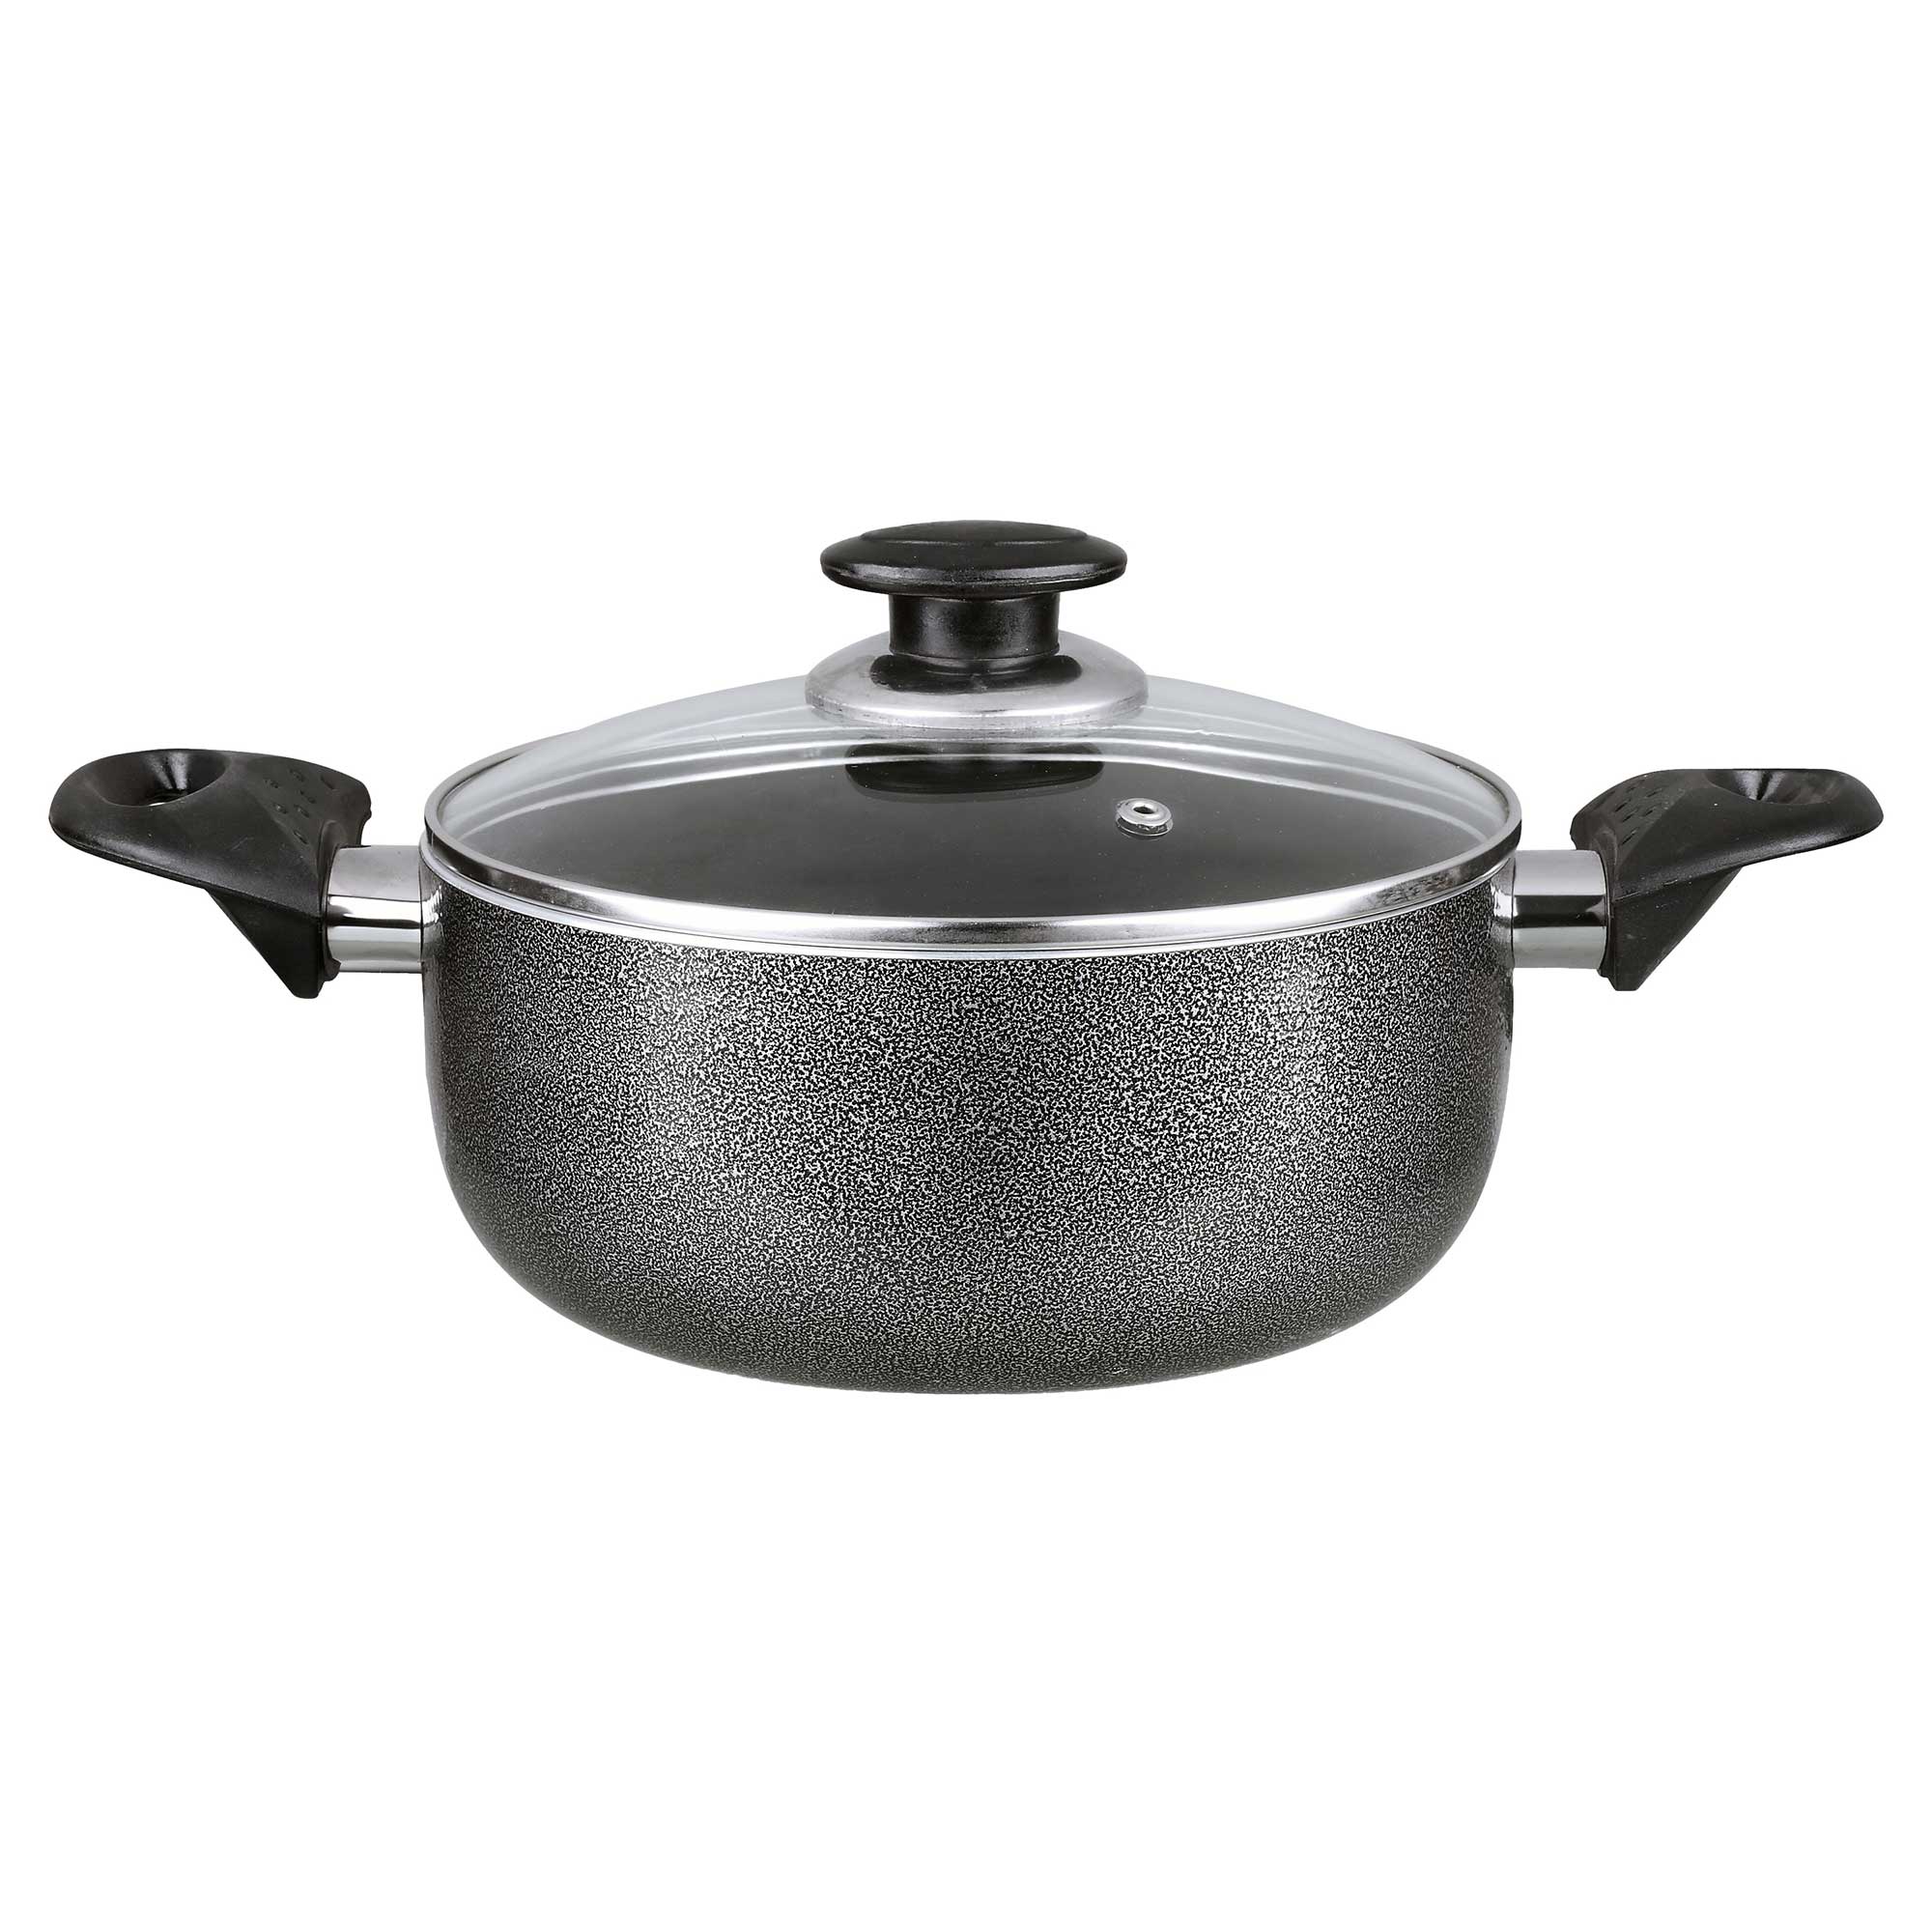 Brentwood BP-510 10-Quart Aluminum Non-Stick Dutch Oven with Tempered Glass Lid